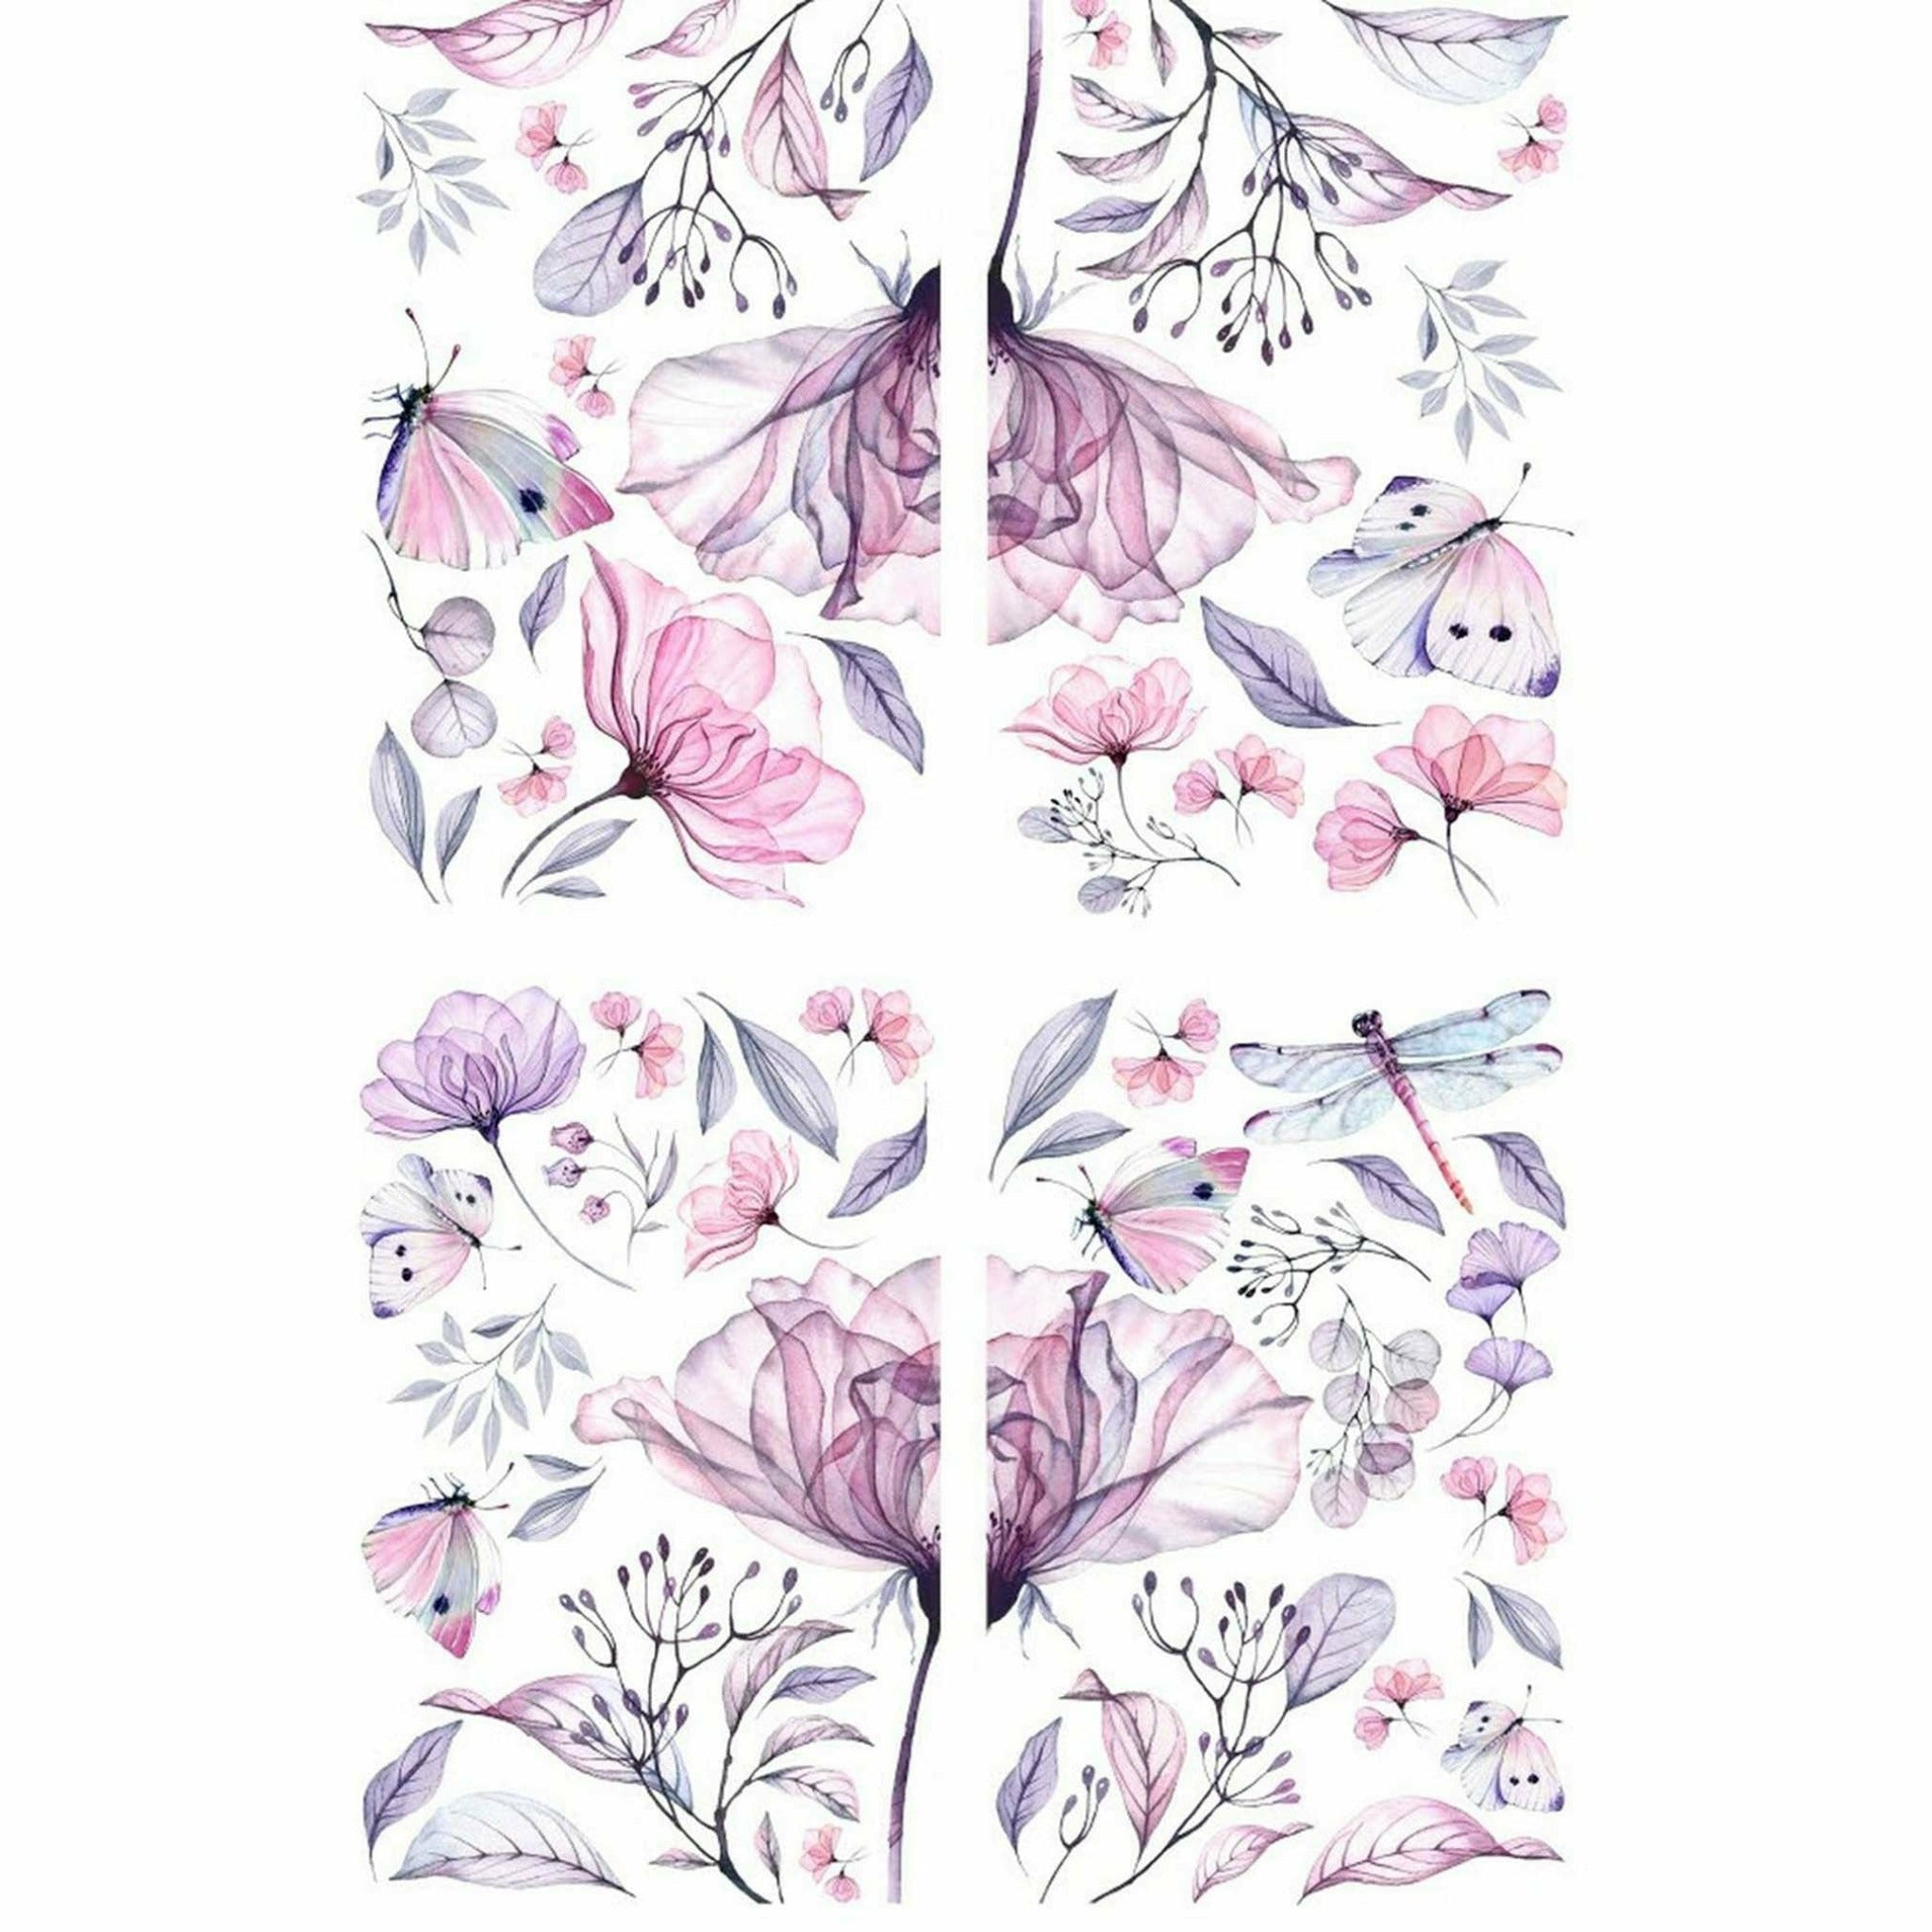 Four sheets of purple and pink translucent flowers with matching butterflies and dragonflies are against a white background.